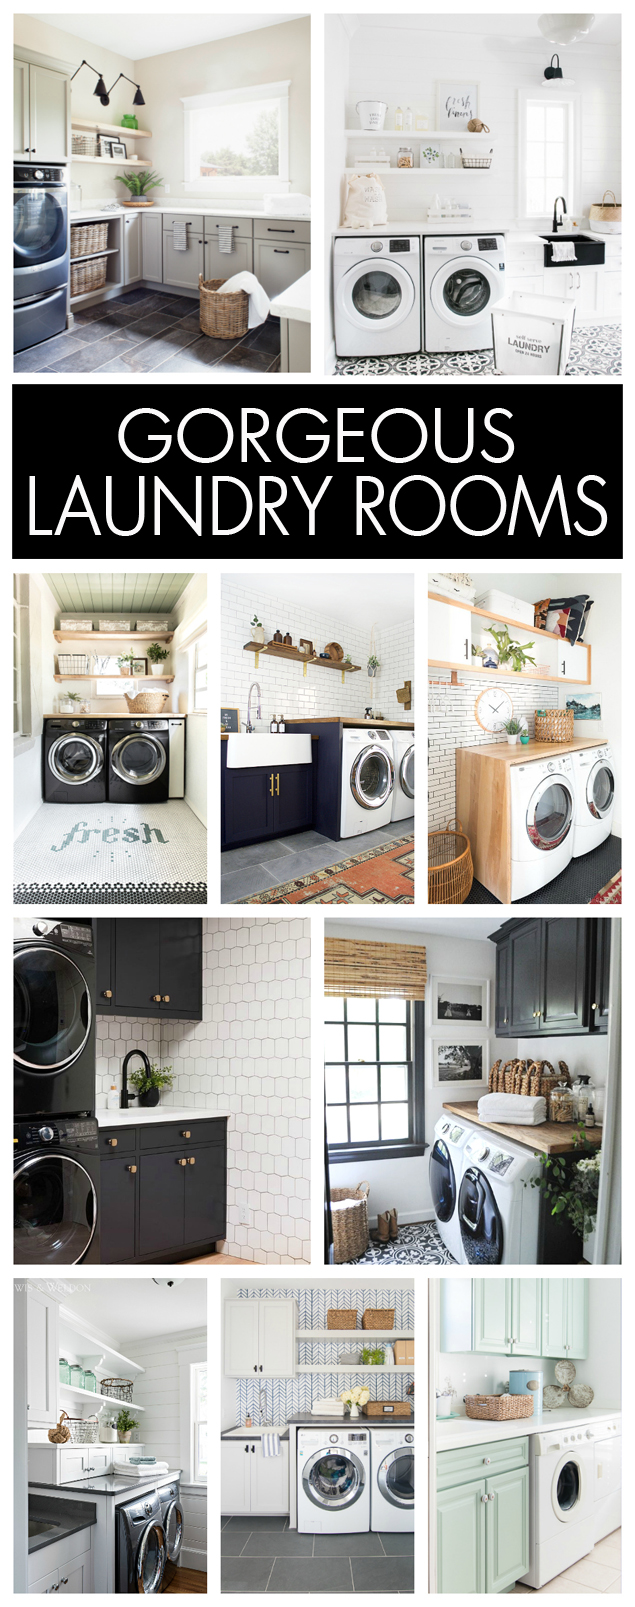 15+ Amazing Laundry Rooms to get great inspiration from!